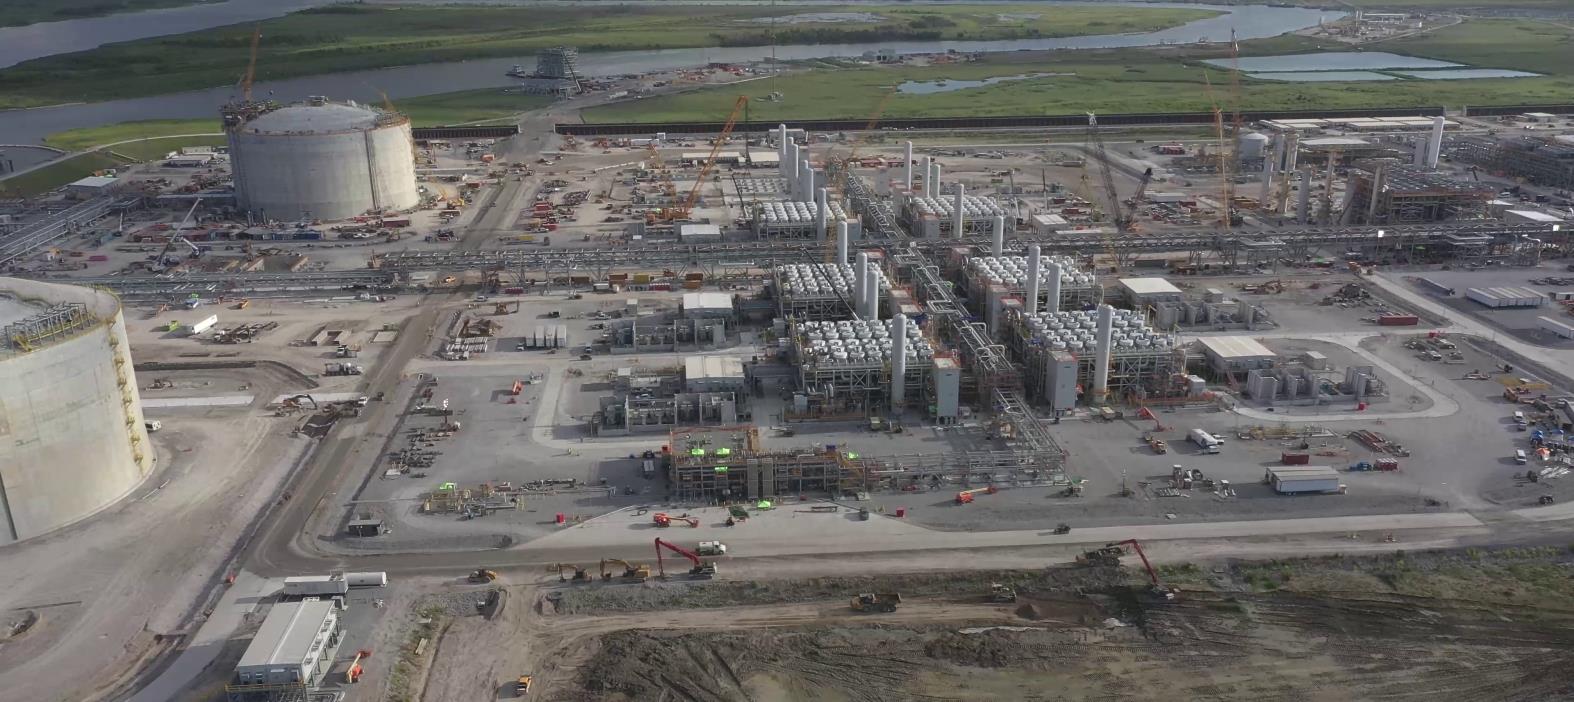 Venture Global LNG says to invest $10 billion in new US export plant